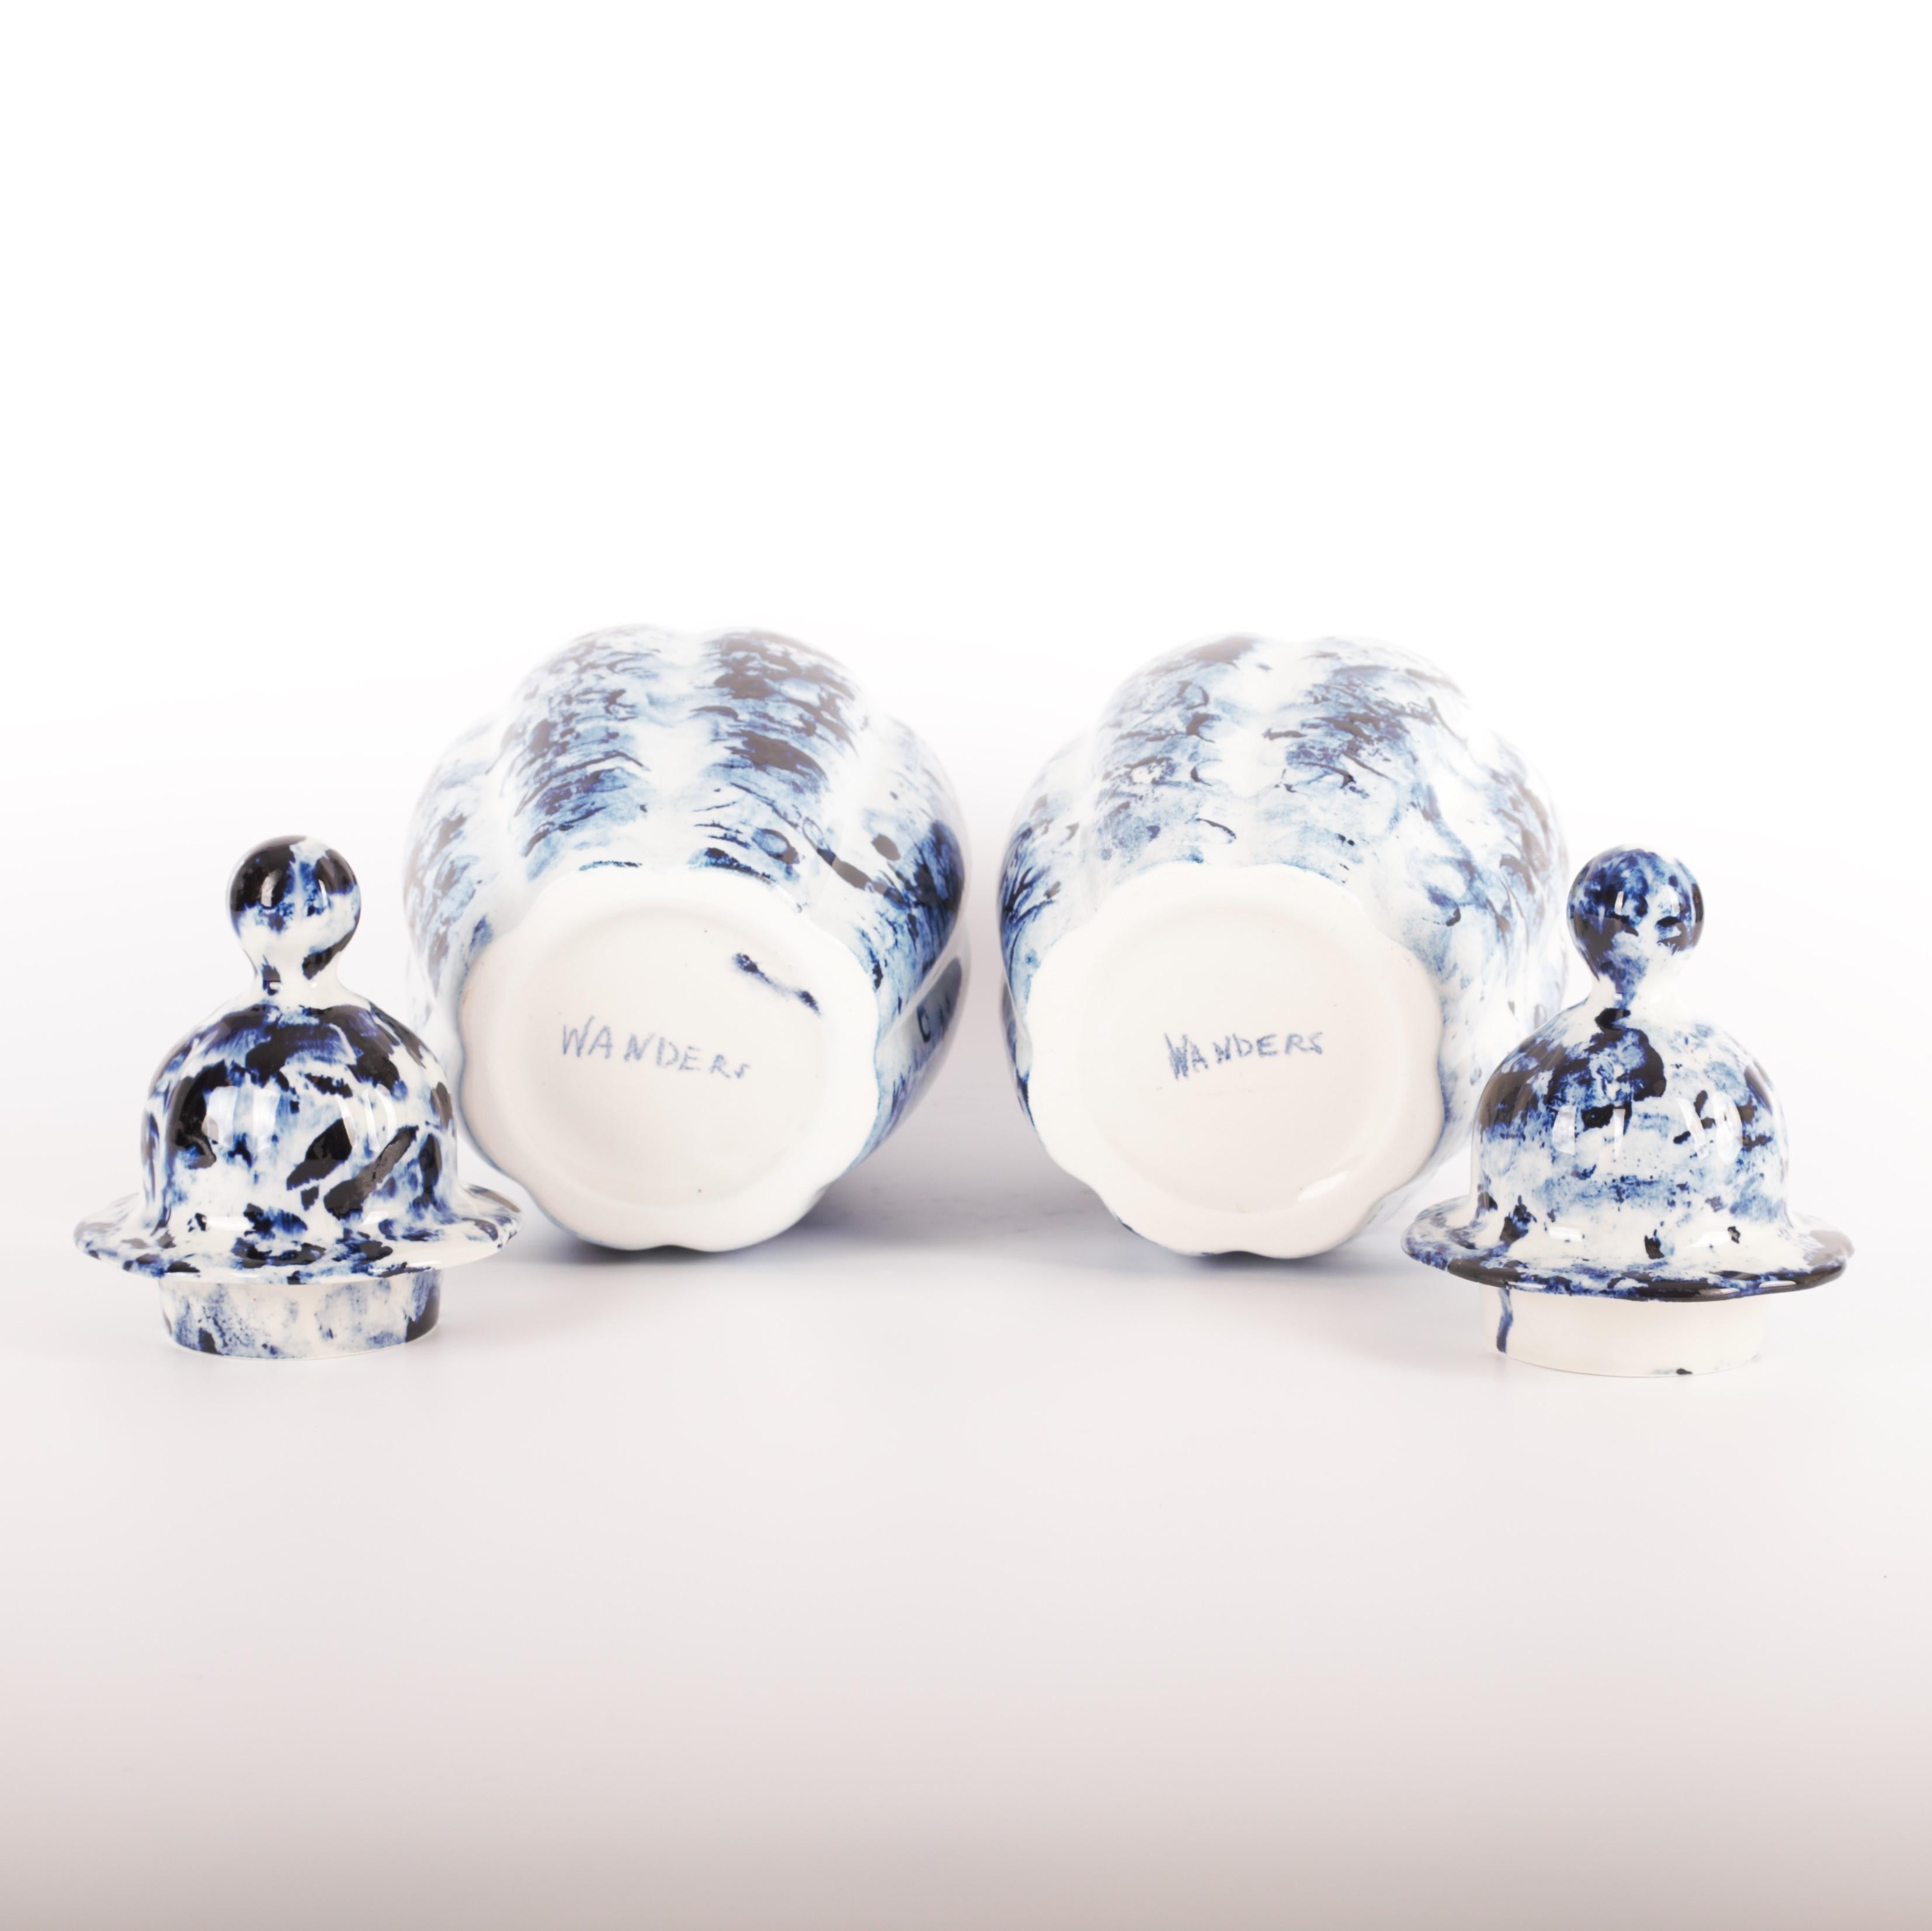 Delft Blue Set of 2 Vase with Lid, by Marcel Wanders, Hand Painted, 2006, Unique In New Condition For Sale In Amsterdam, NL